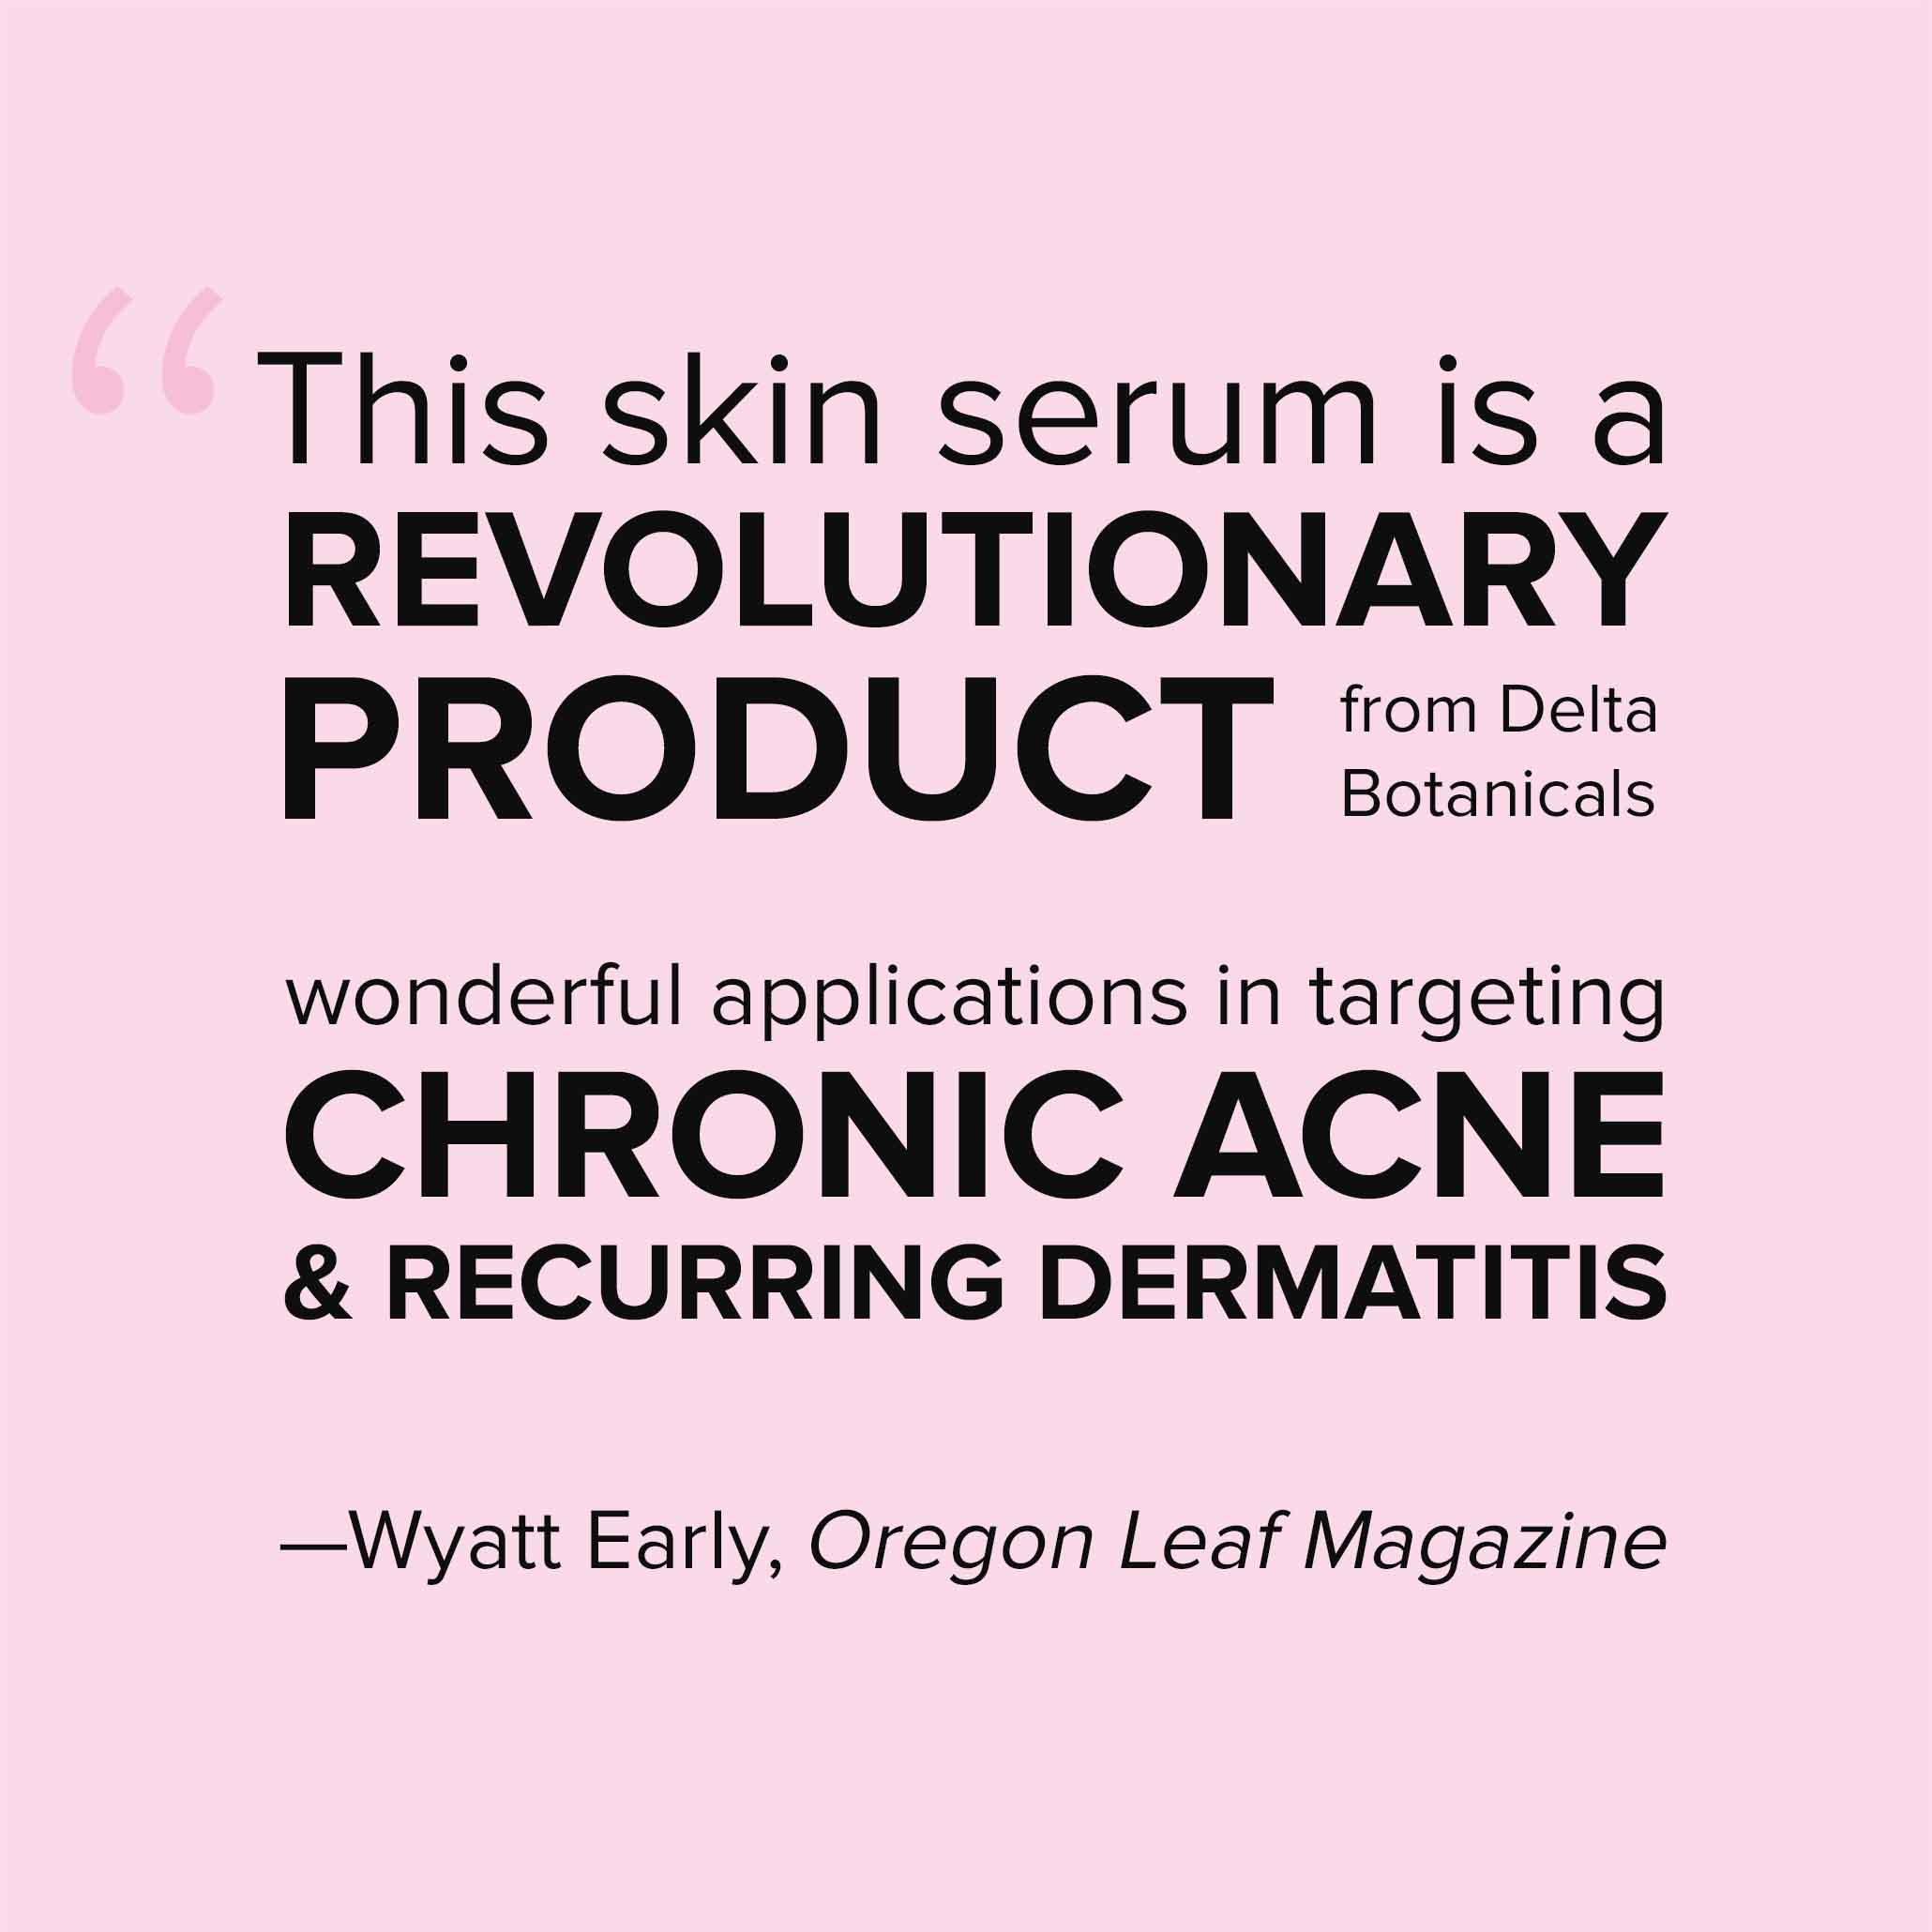 This skin serum is a REVOLUTIONARY PRODUCT from Delta Botanicals with wonderful applications in targeting CHRONIC ACNE & RECURRING DERMATITIS —Wyatt Early, Oregon Leaf Magazine